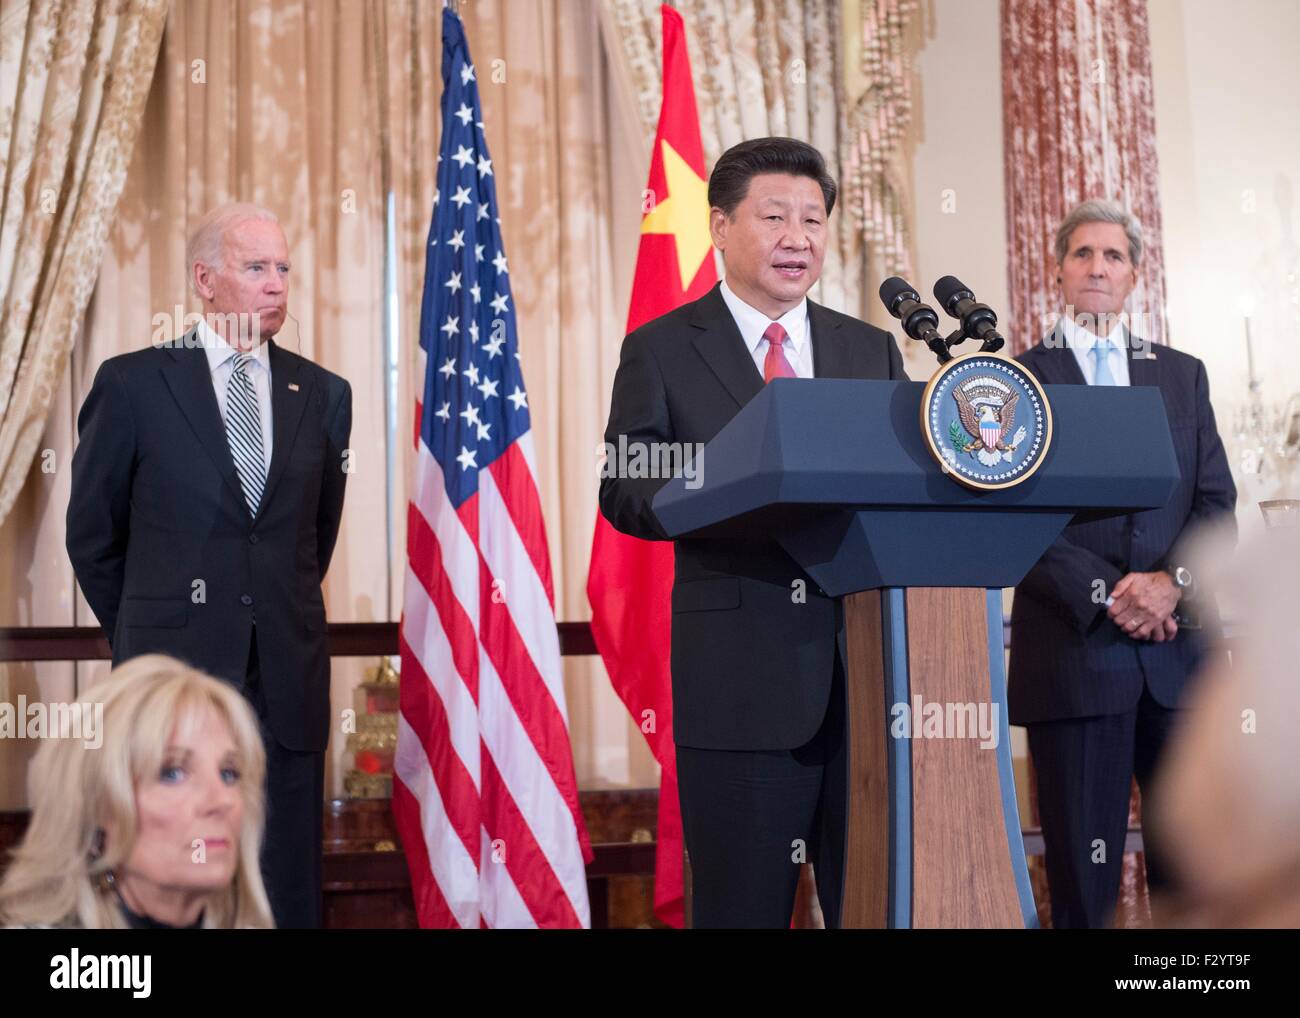 Washington DC, USA. 25th Sep, 2015.  Chinese President Xi Jinping delivers remarks as U.S. Vice President Joe Biden and Secretary of State John Kerry look on at a State Luncheon in the Chinese President's honor at the Department of State September 25, 2015 in Washington, DC. Stock Photo